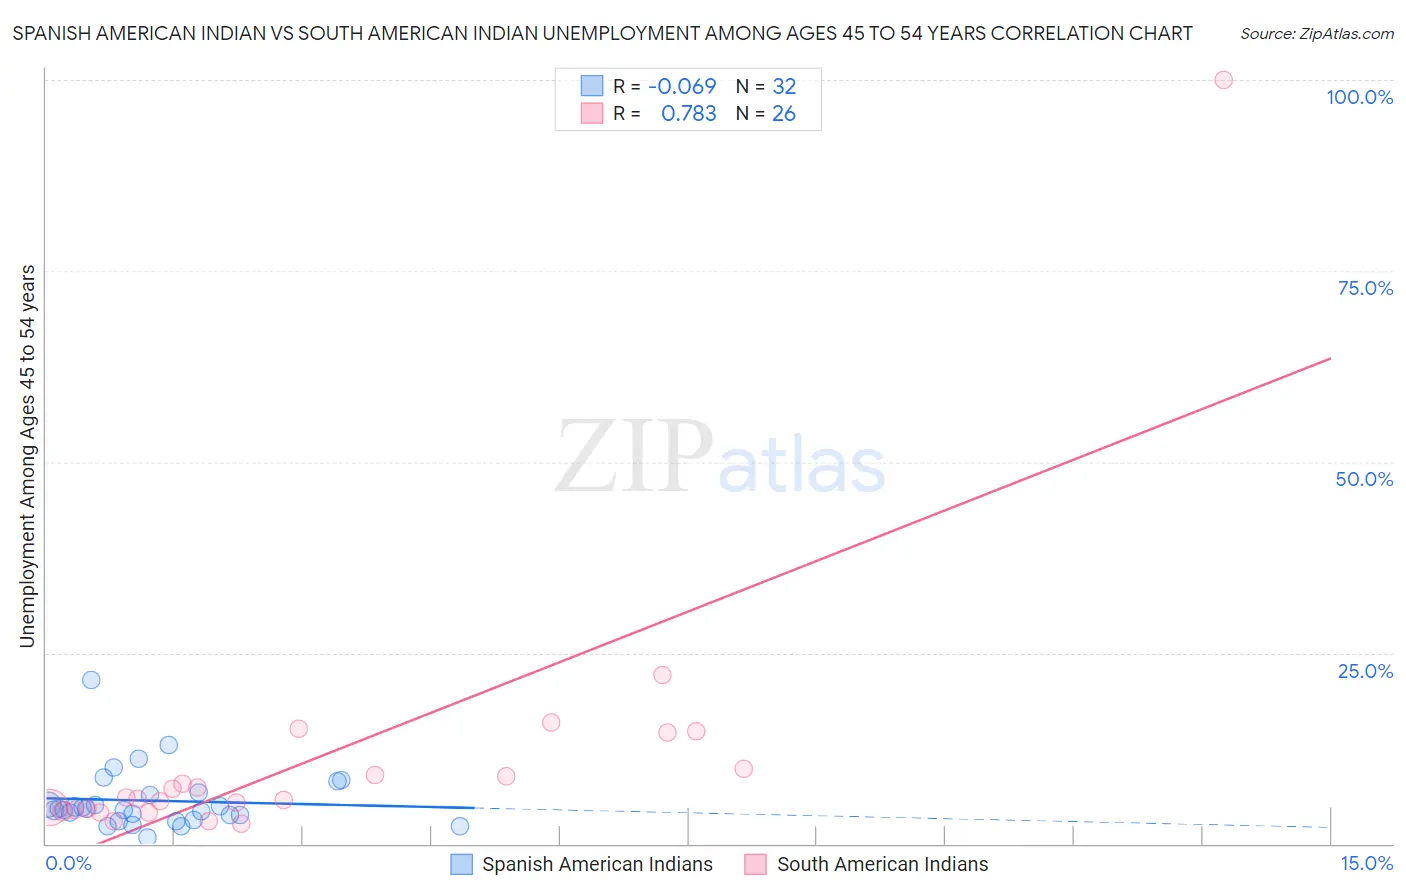 Spanish American Indian vs South American Indian Unemployment Among Ages 45 to 54 years